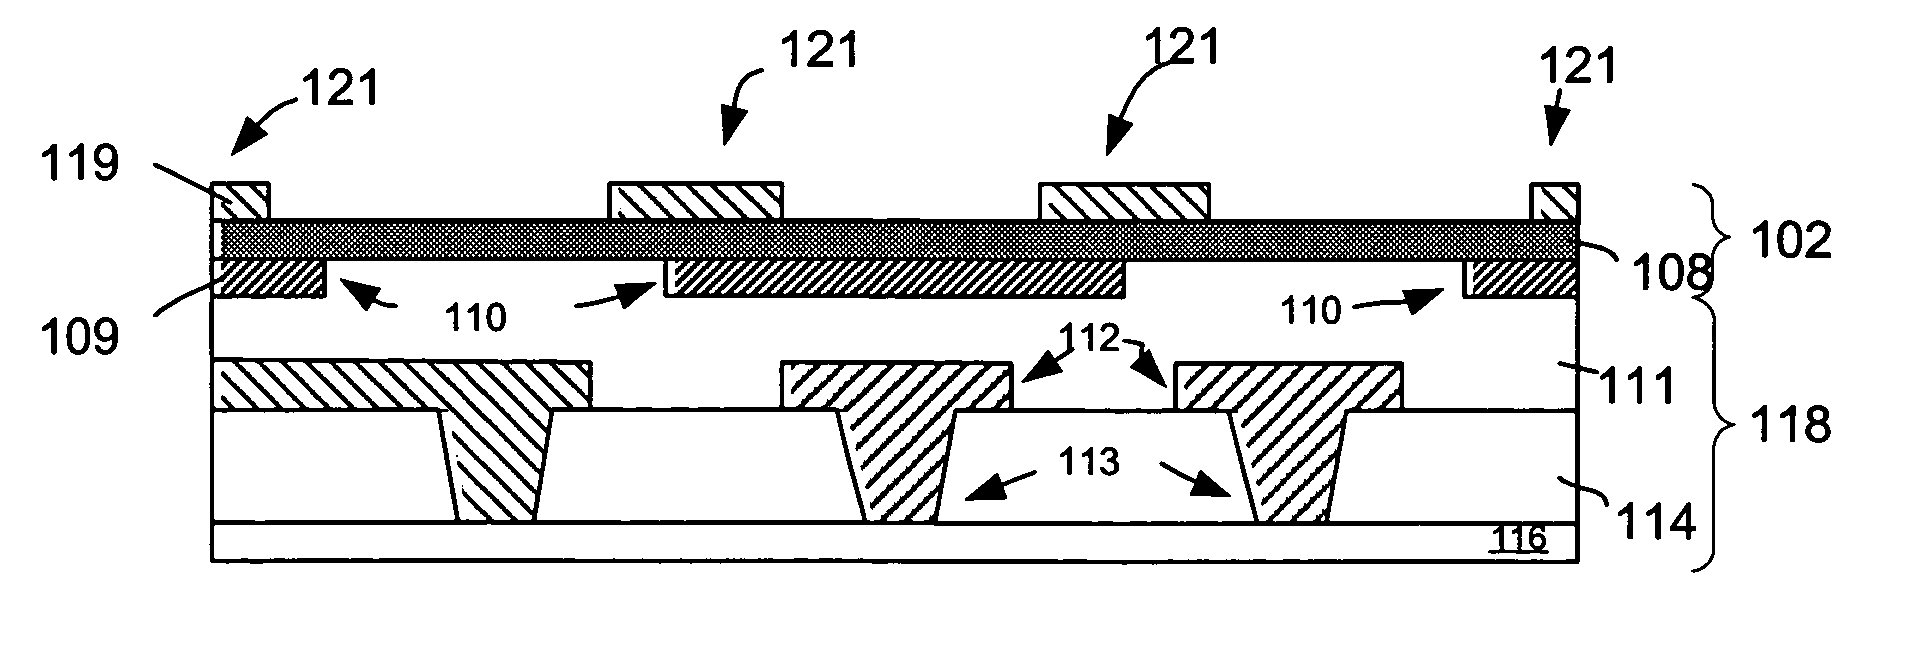 Method of providing a via opening in a dielectric film of a thin film capacitor